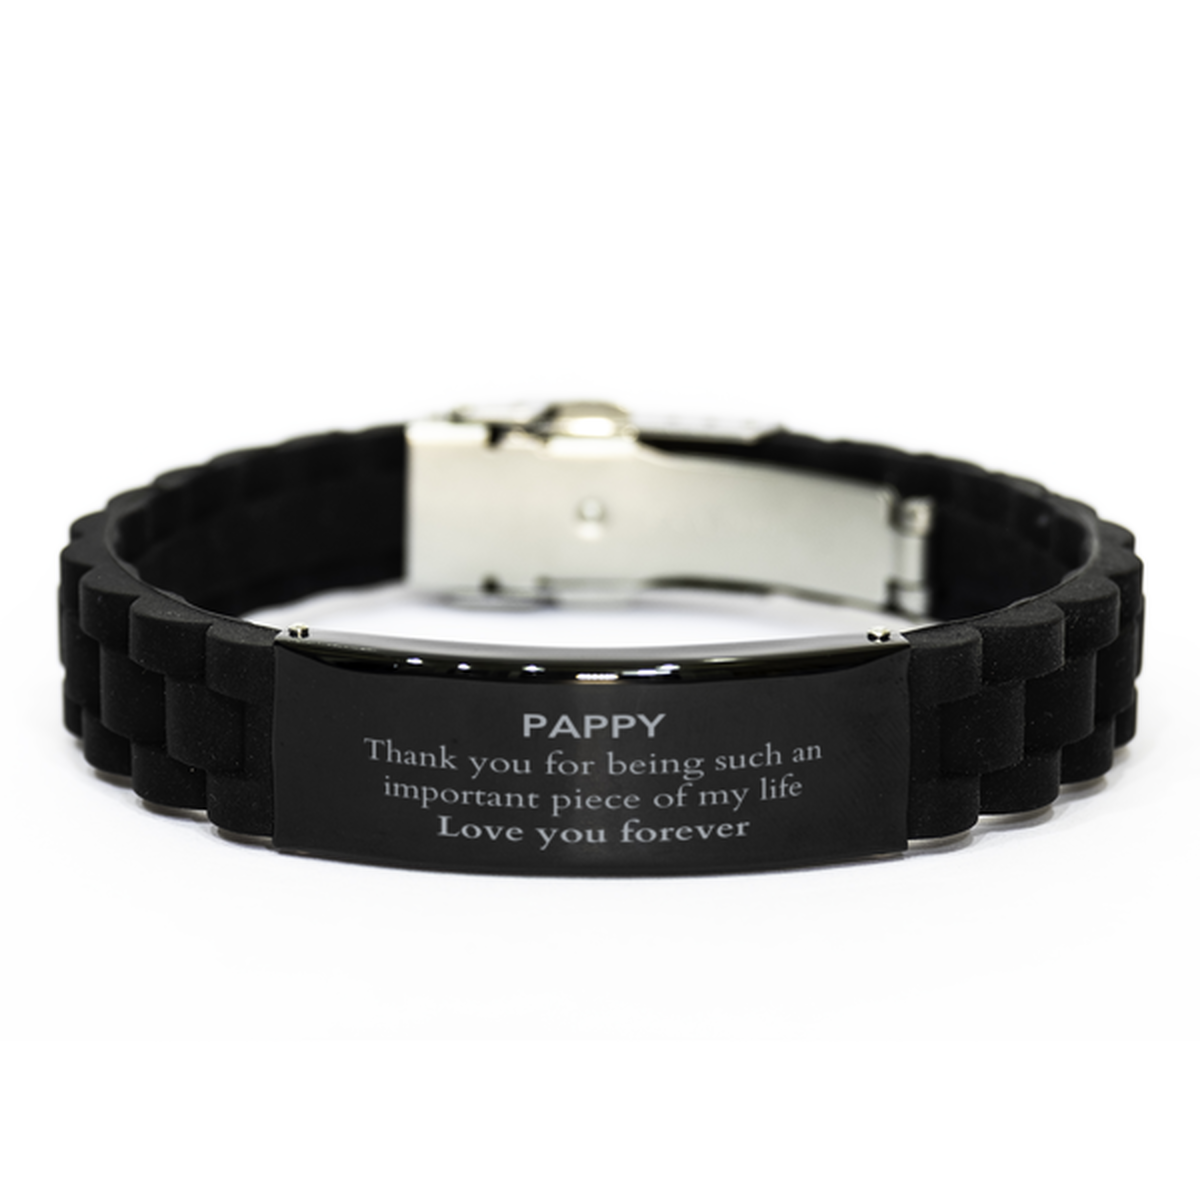 Appropriate Pappy Black Glidelock Clasp Bracelet Epic Birthday Gifts for Pappy Thank you for being such an important piece of my life Pappy Christmas Mothers Fathers Day